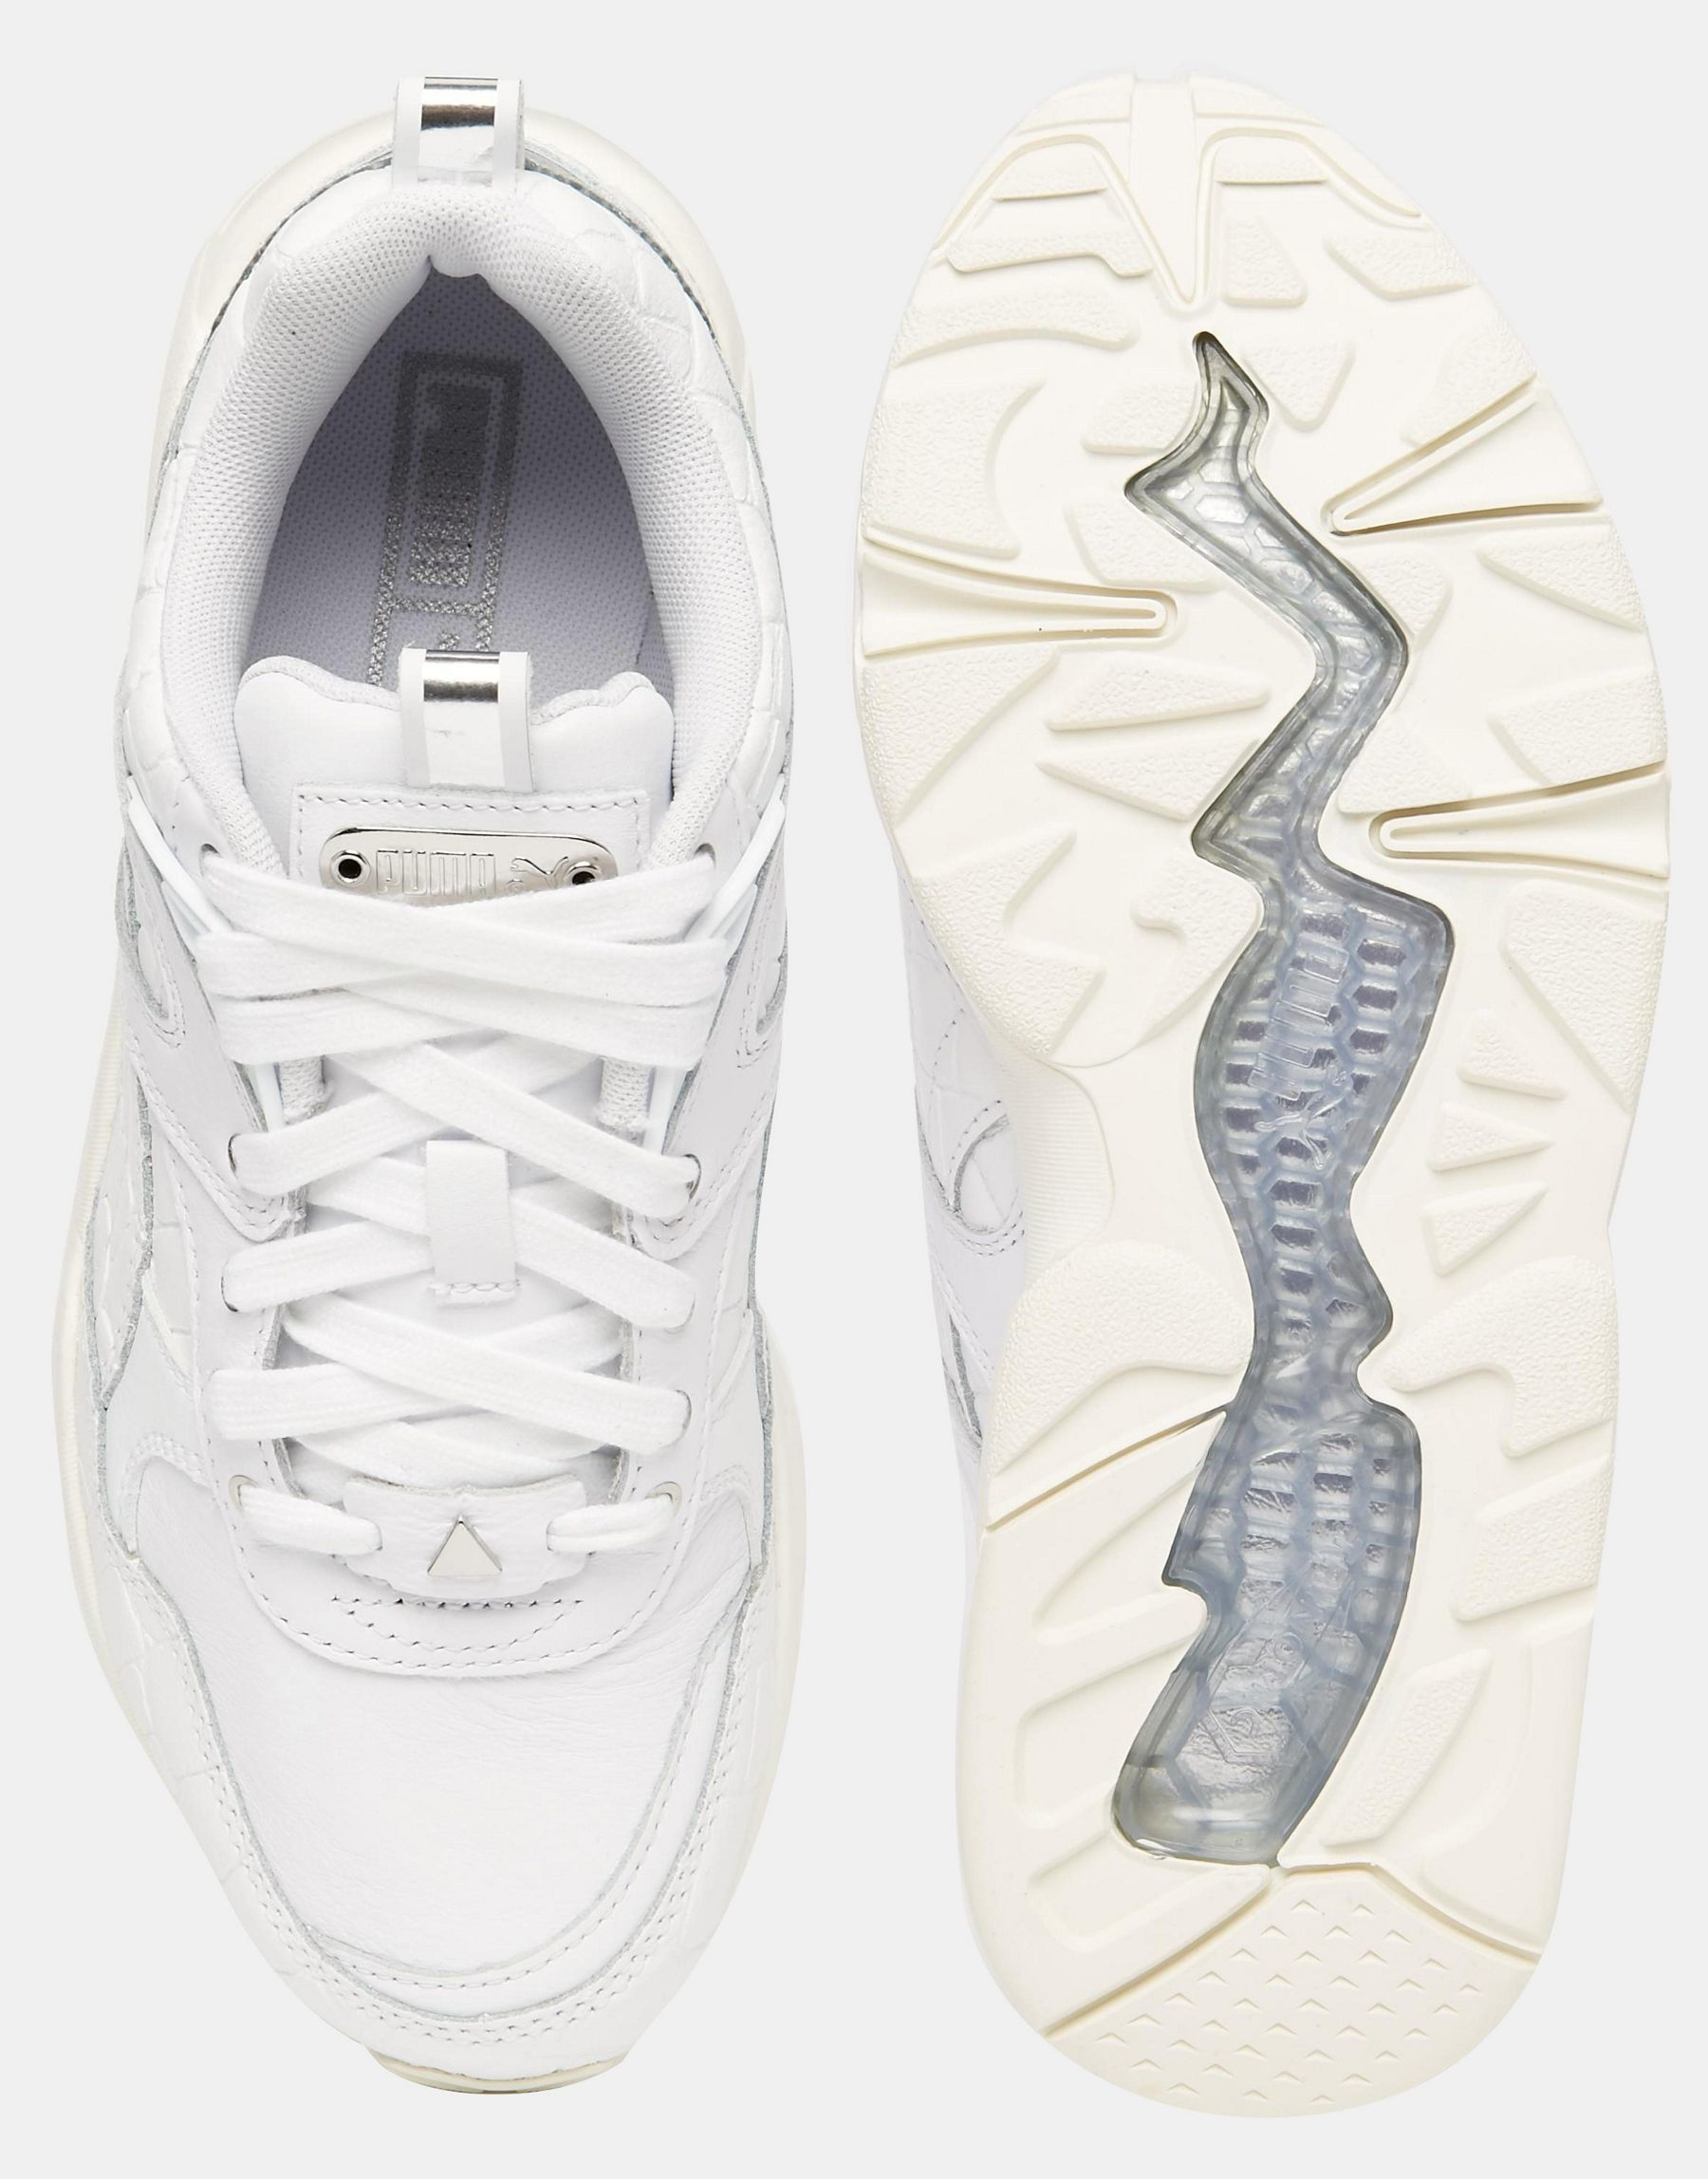 PUMA Leather R698 White Exotic Croc Texture Trainers - Lyst